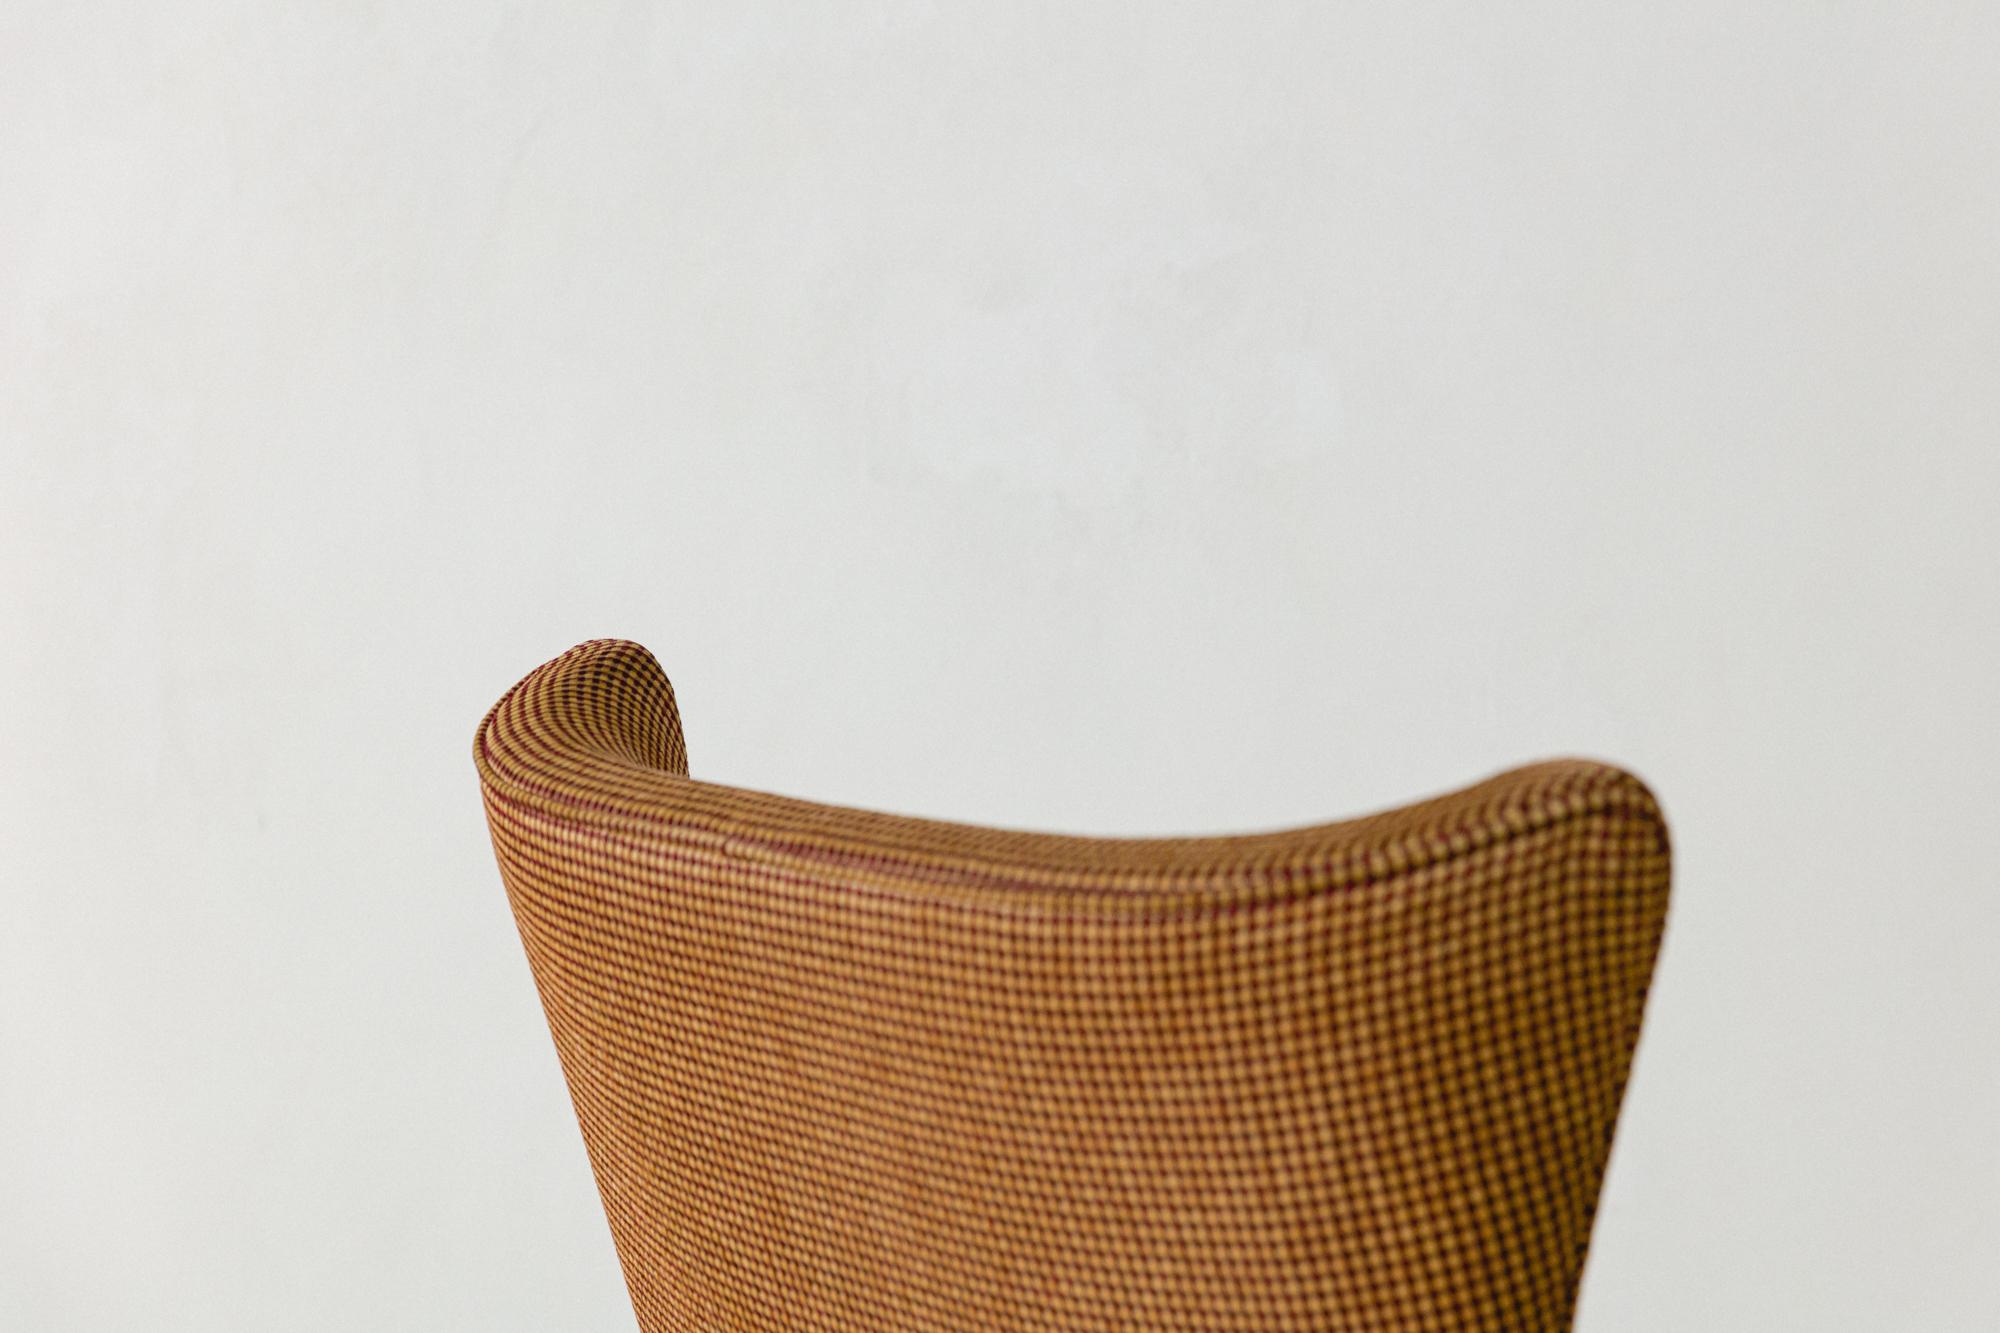 Mid-20th Century Vintage Rosewood Armchair by Móveis Cimo, 1950s, Brazilian Midcentury